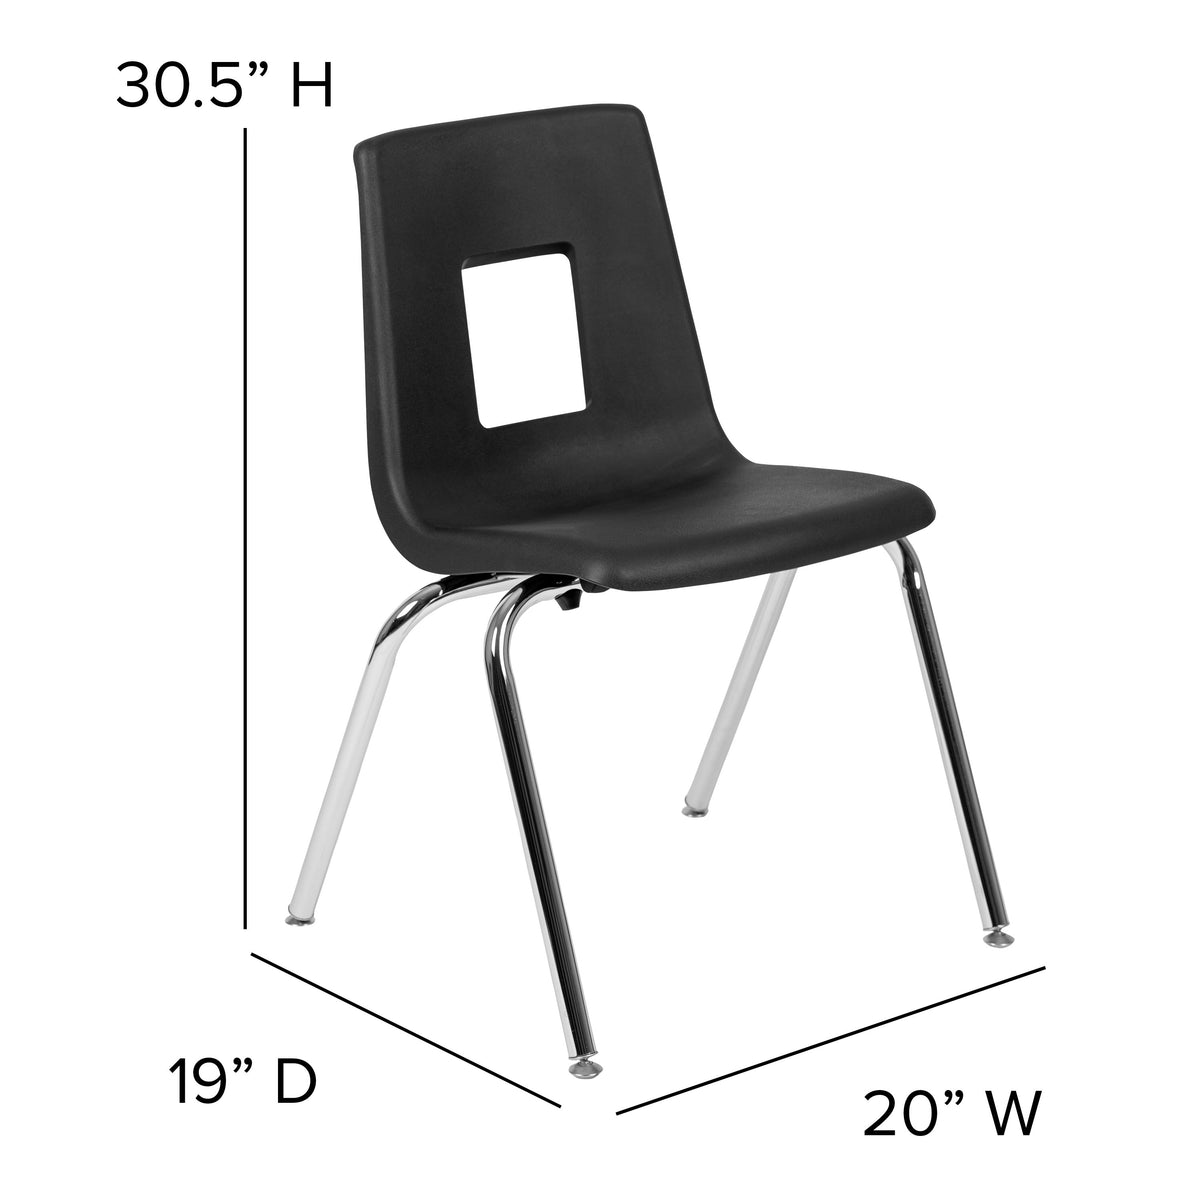 Oak |#| Mobile 47.5inch Circle Wave Activity Table Set-18inch Student Stack Chairs, Oak/Black